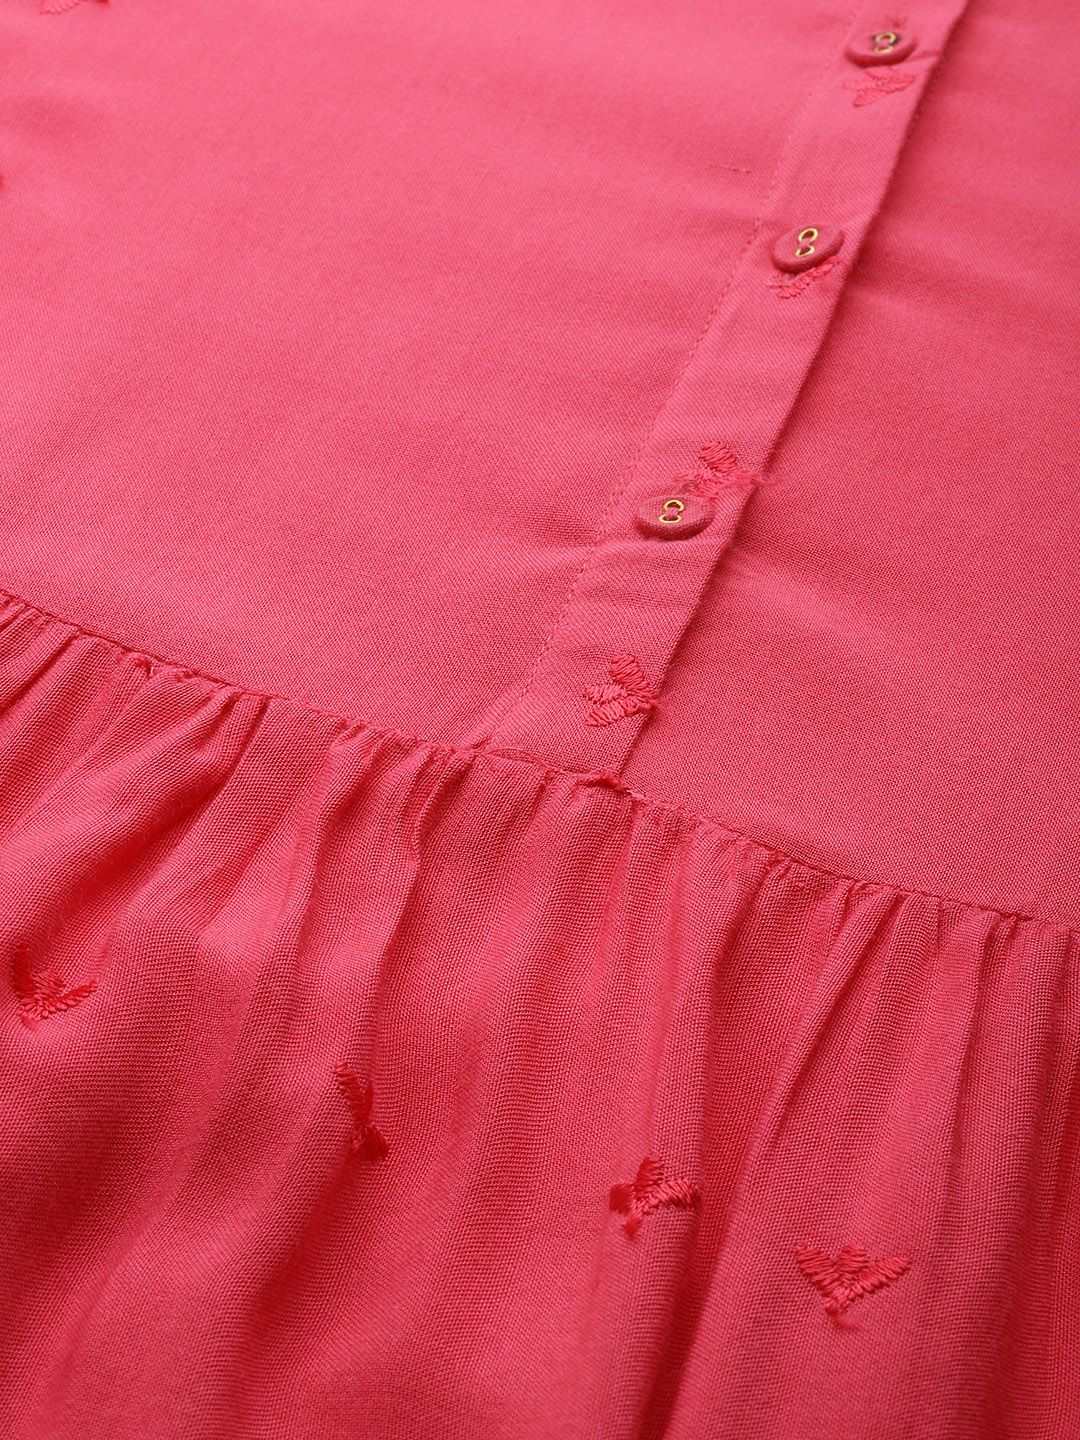 Pink Embroidered A-Line Dress